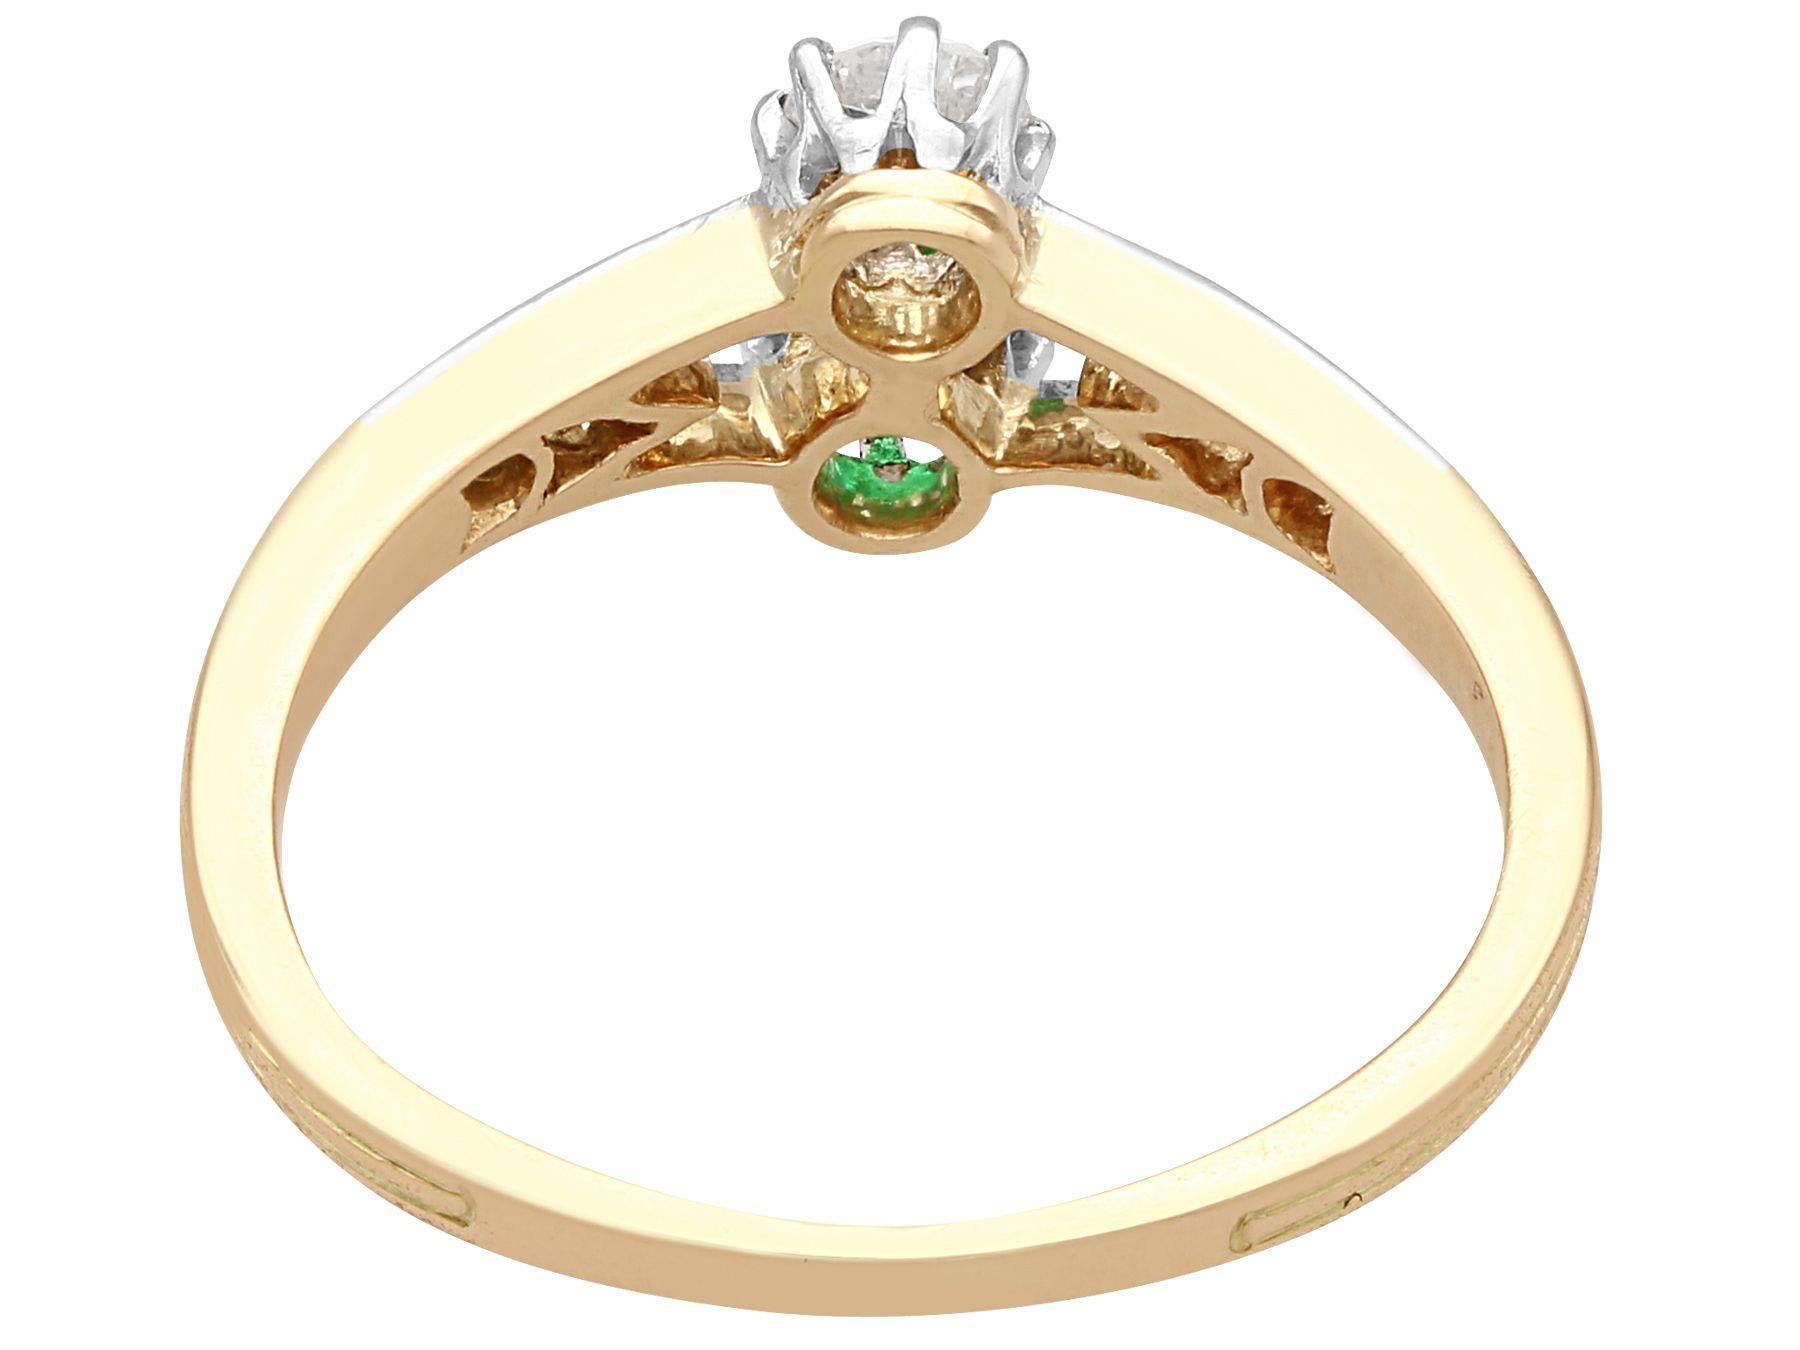 1920s Emerald and Diamond Yellow Gold Cocktail Ring In Excellent Condition For Sale In Jesmond, Newcastle Upon Tyne